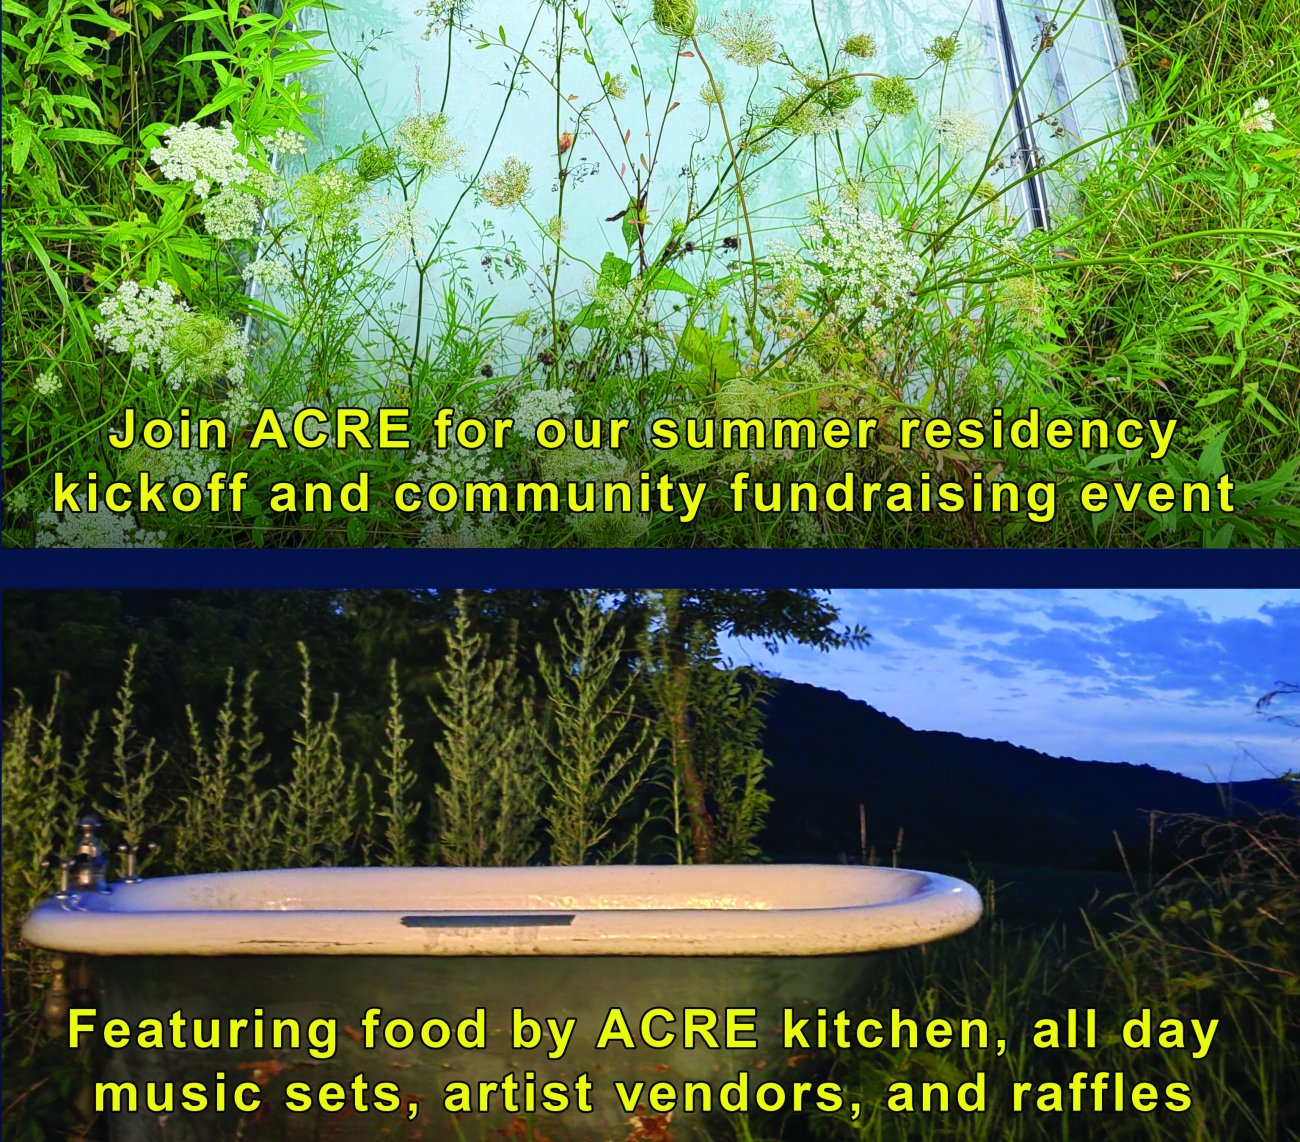 Join ACRE for a party at our new project space at 2921 N Clark St to kick off summer and our 15th residency season! This community fundraising event features food and drink by ACRE Kitchen, day-long music sets from ACRE artists and friends, vendors selling artist-made wares, and raffles. 